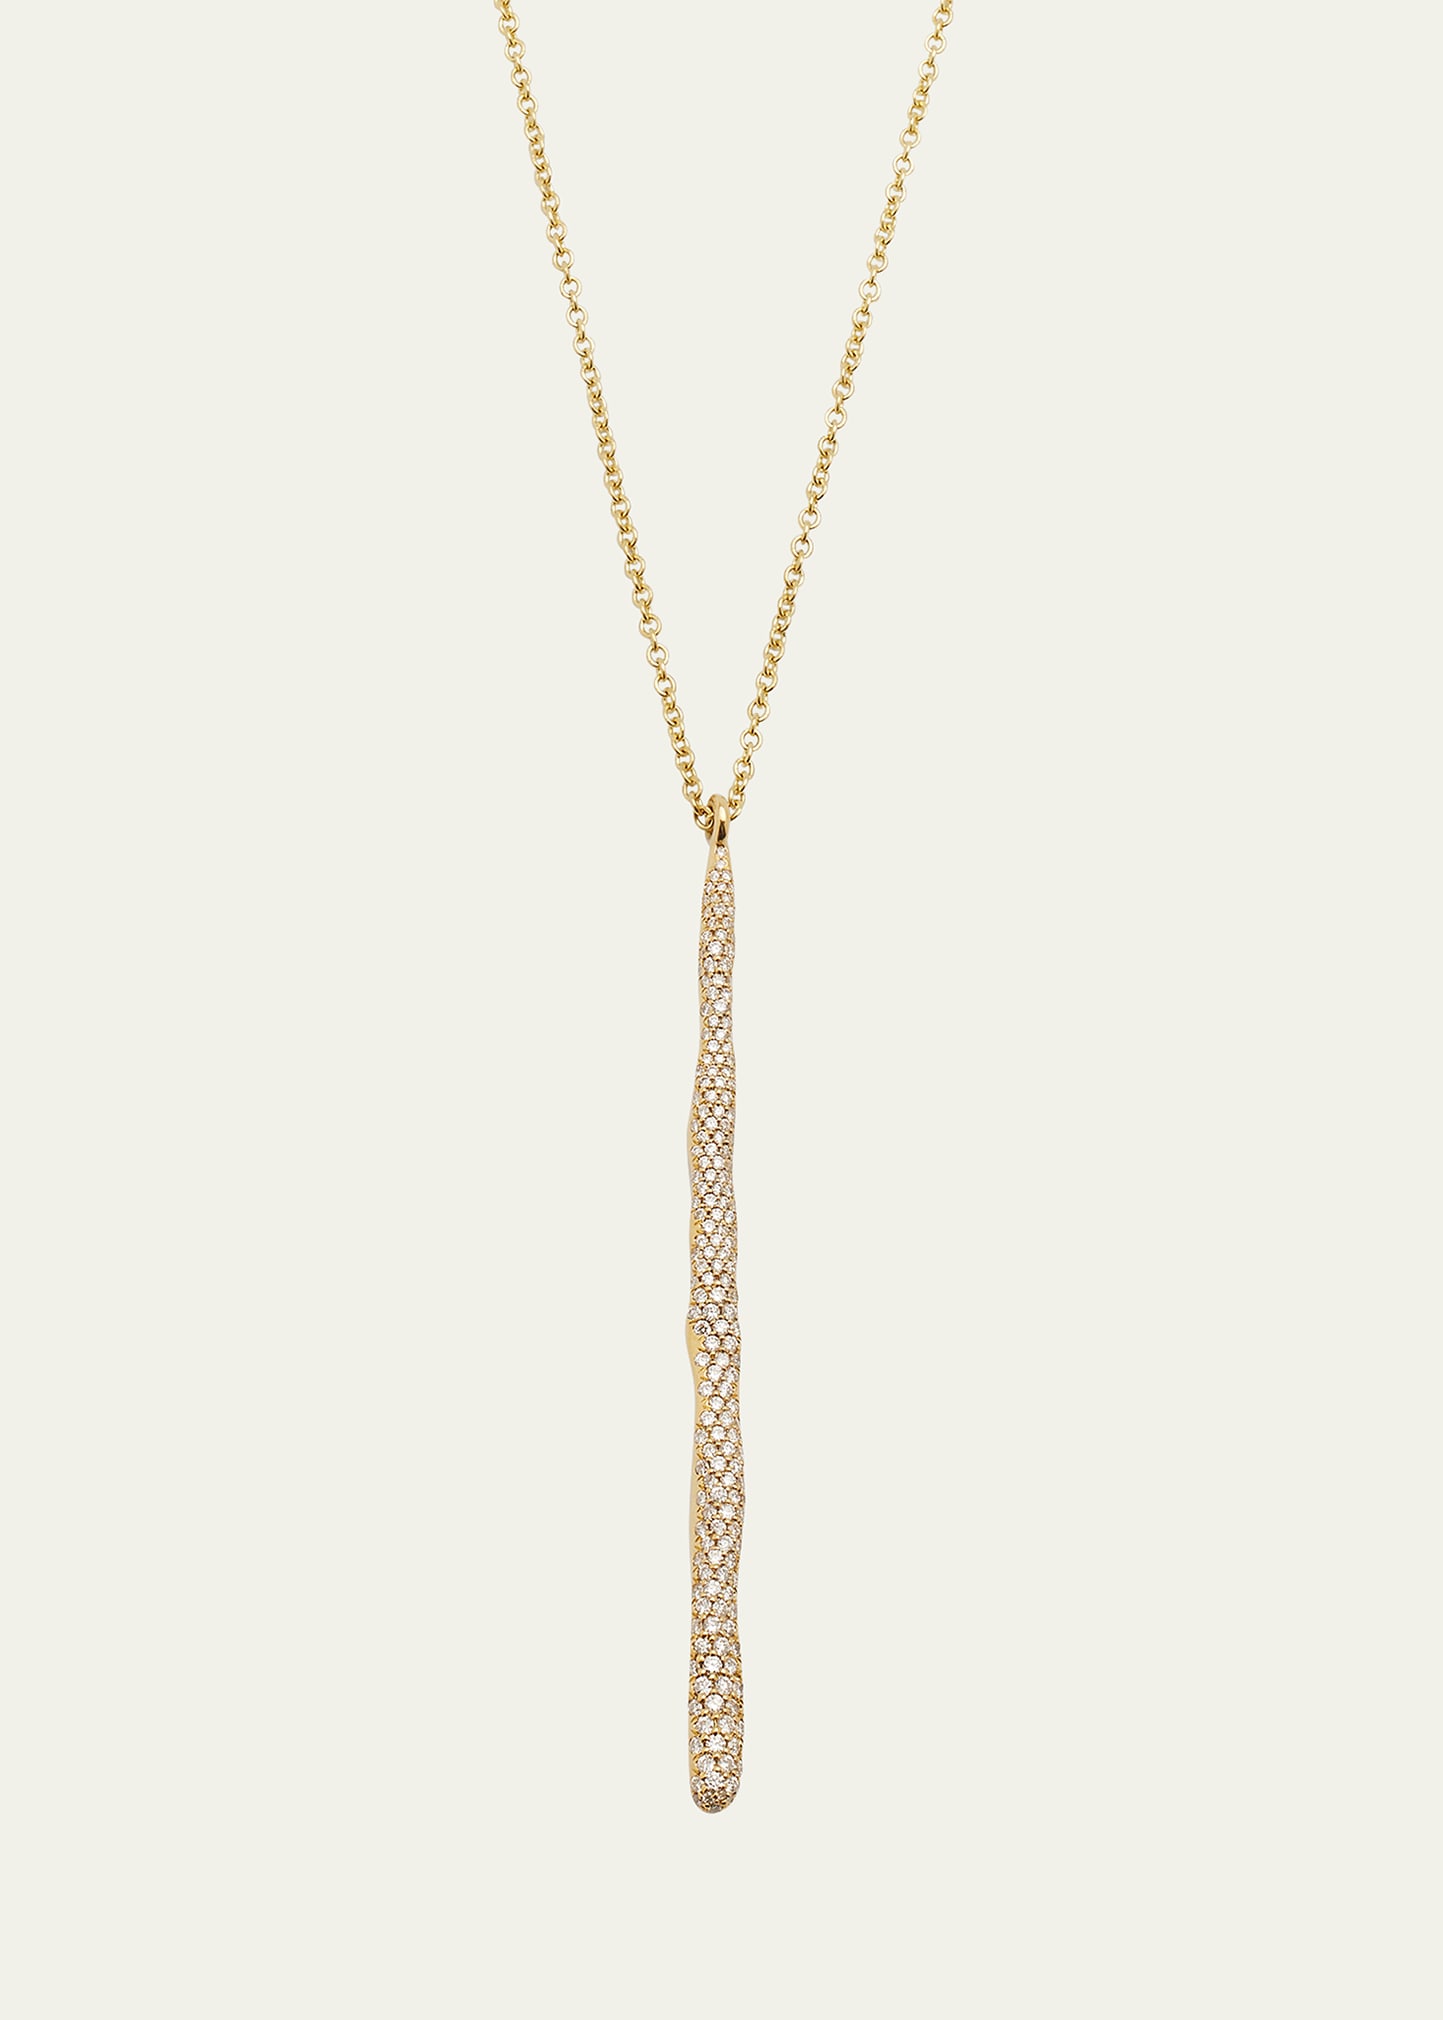 IPPOLITA YELLOW GOLD STARDUST LONG PAVE SQUIGGLE STICK PENDANT NECKLACE WITH DIAMONDS, 16-18"L